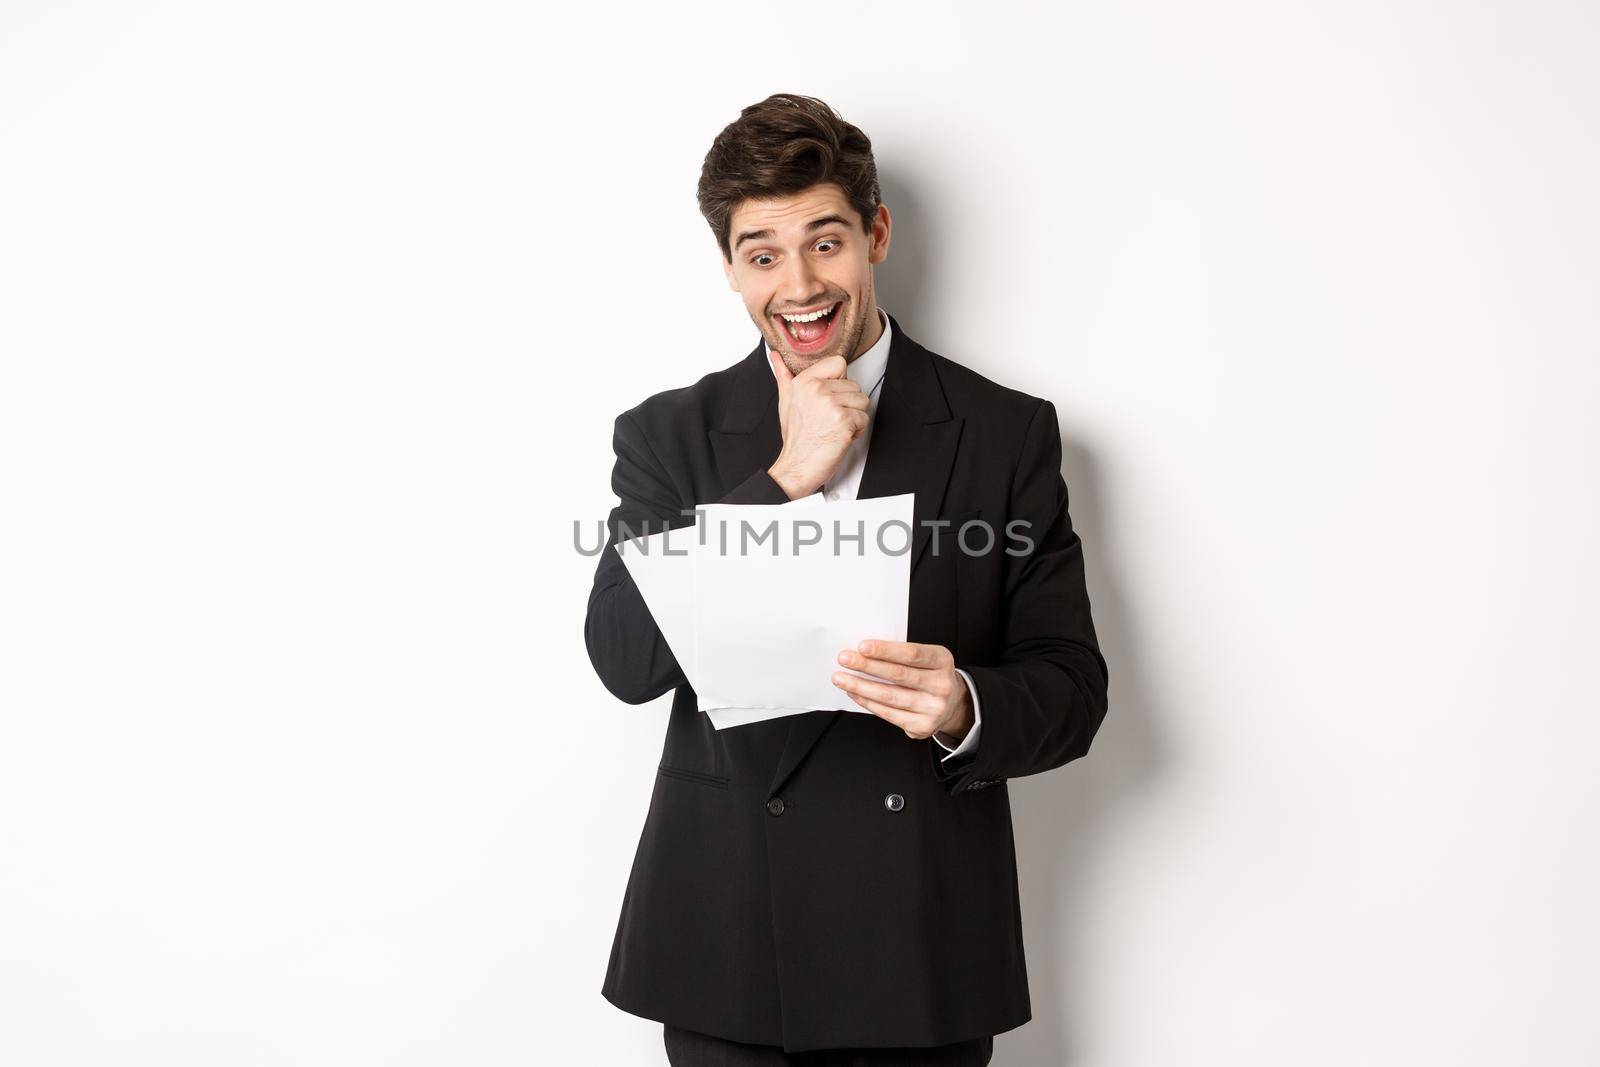 Portrait of handsome businessman looking excited at documents, working, standing against white background in black suit.